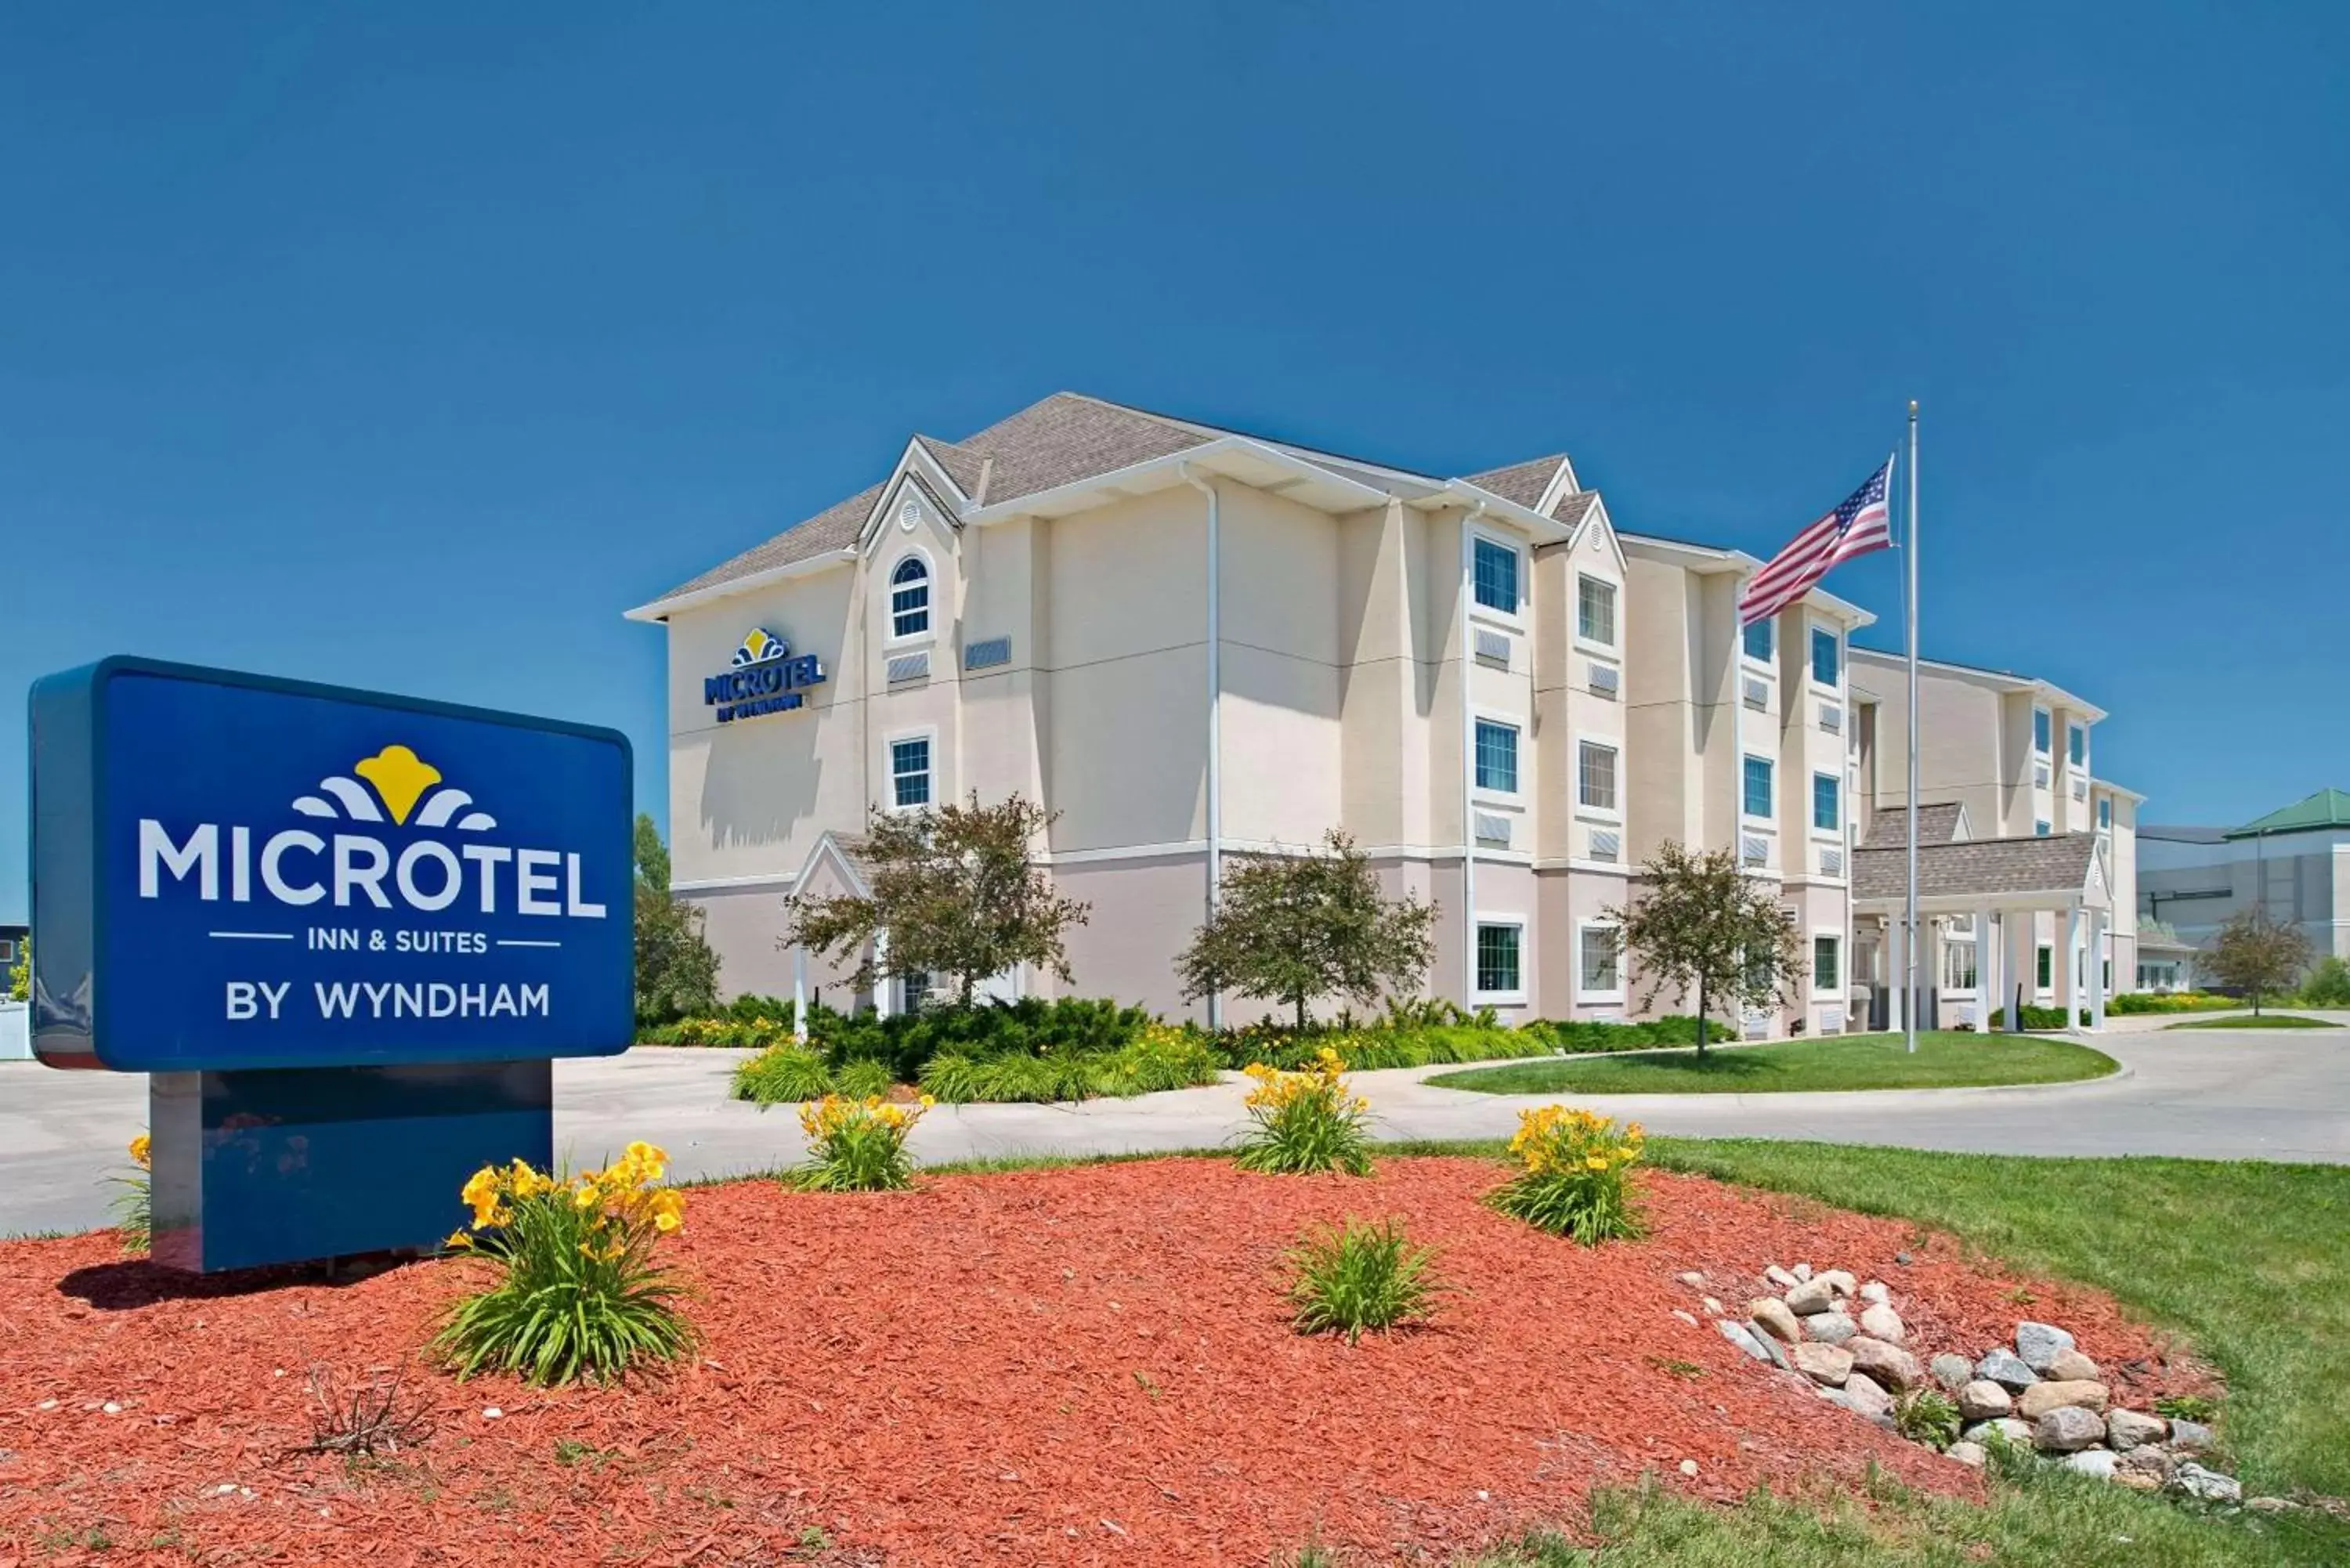 Property Building in Microtel Inn & Suites by Wyndham Bluffs